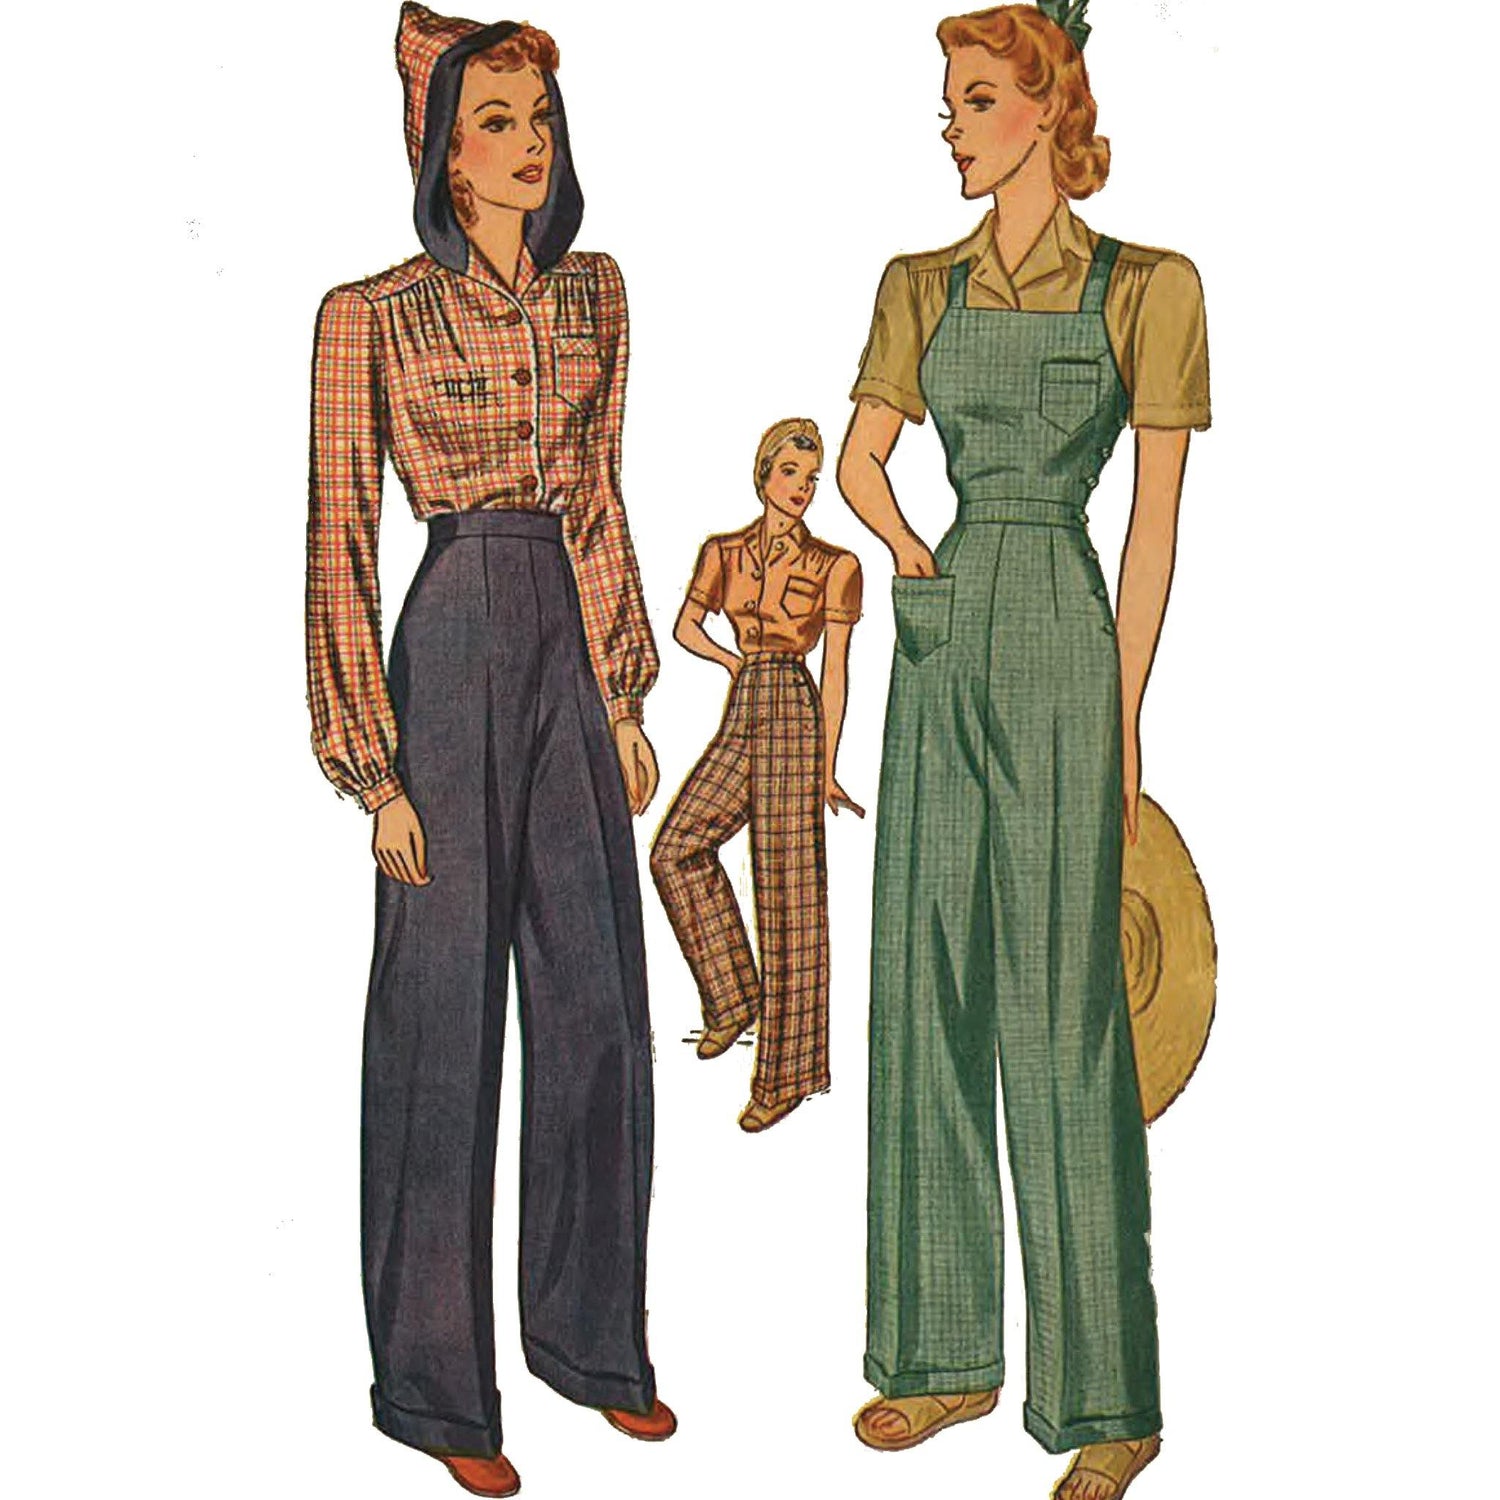 Women wearing Land Girl outfits. Left, wearing hooded shirt and slacks. Right, wearing short sleeve shirt and overalls. Centre, wearing short sleeve shirt and slacks.